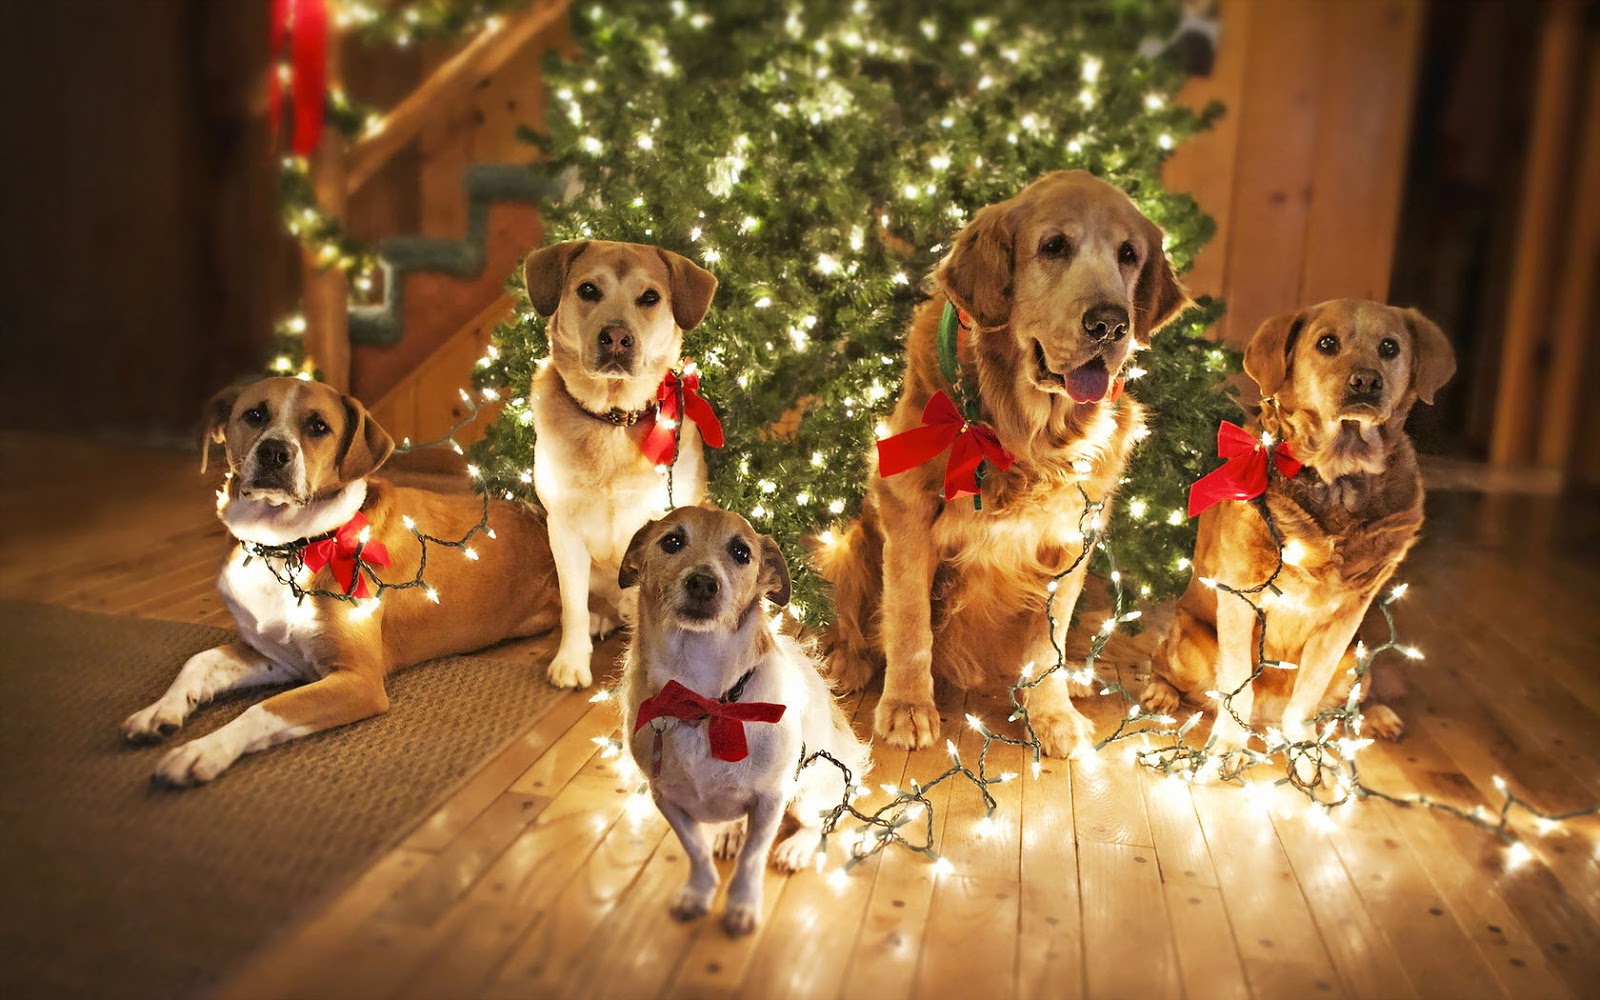 photo-of-dogs-under-the-christmas-tree-hd-christmas-wallpaper-with-dogs.jpg